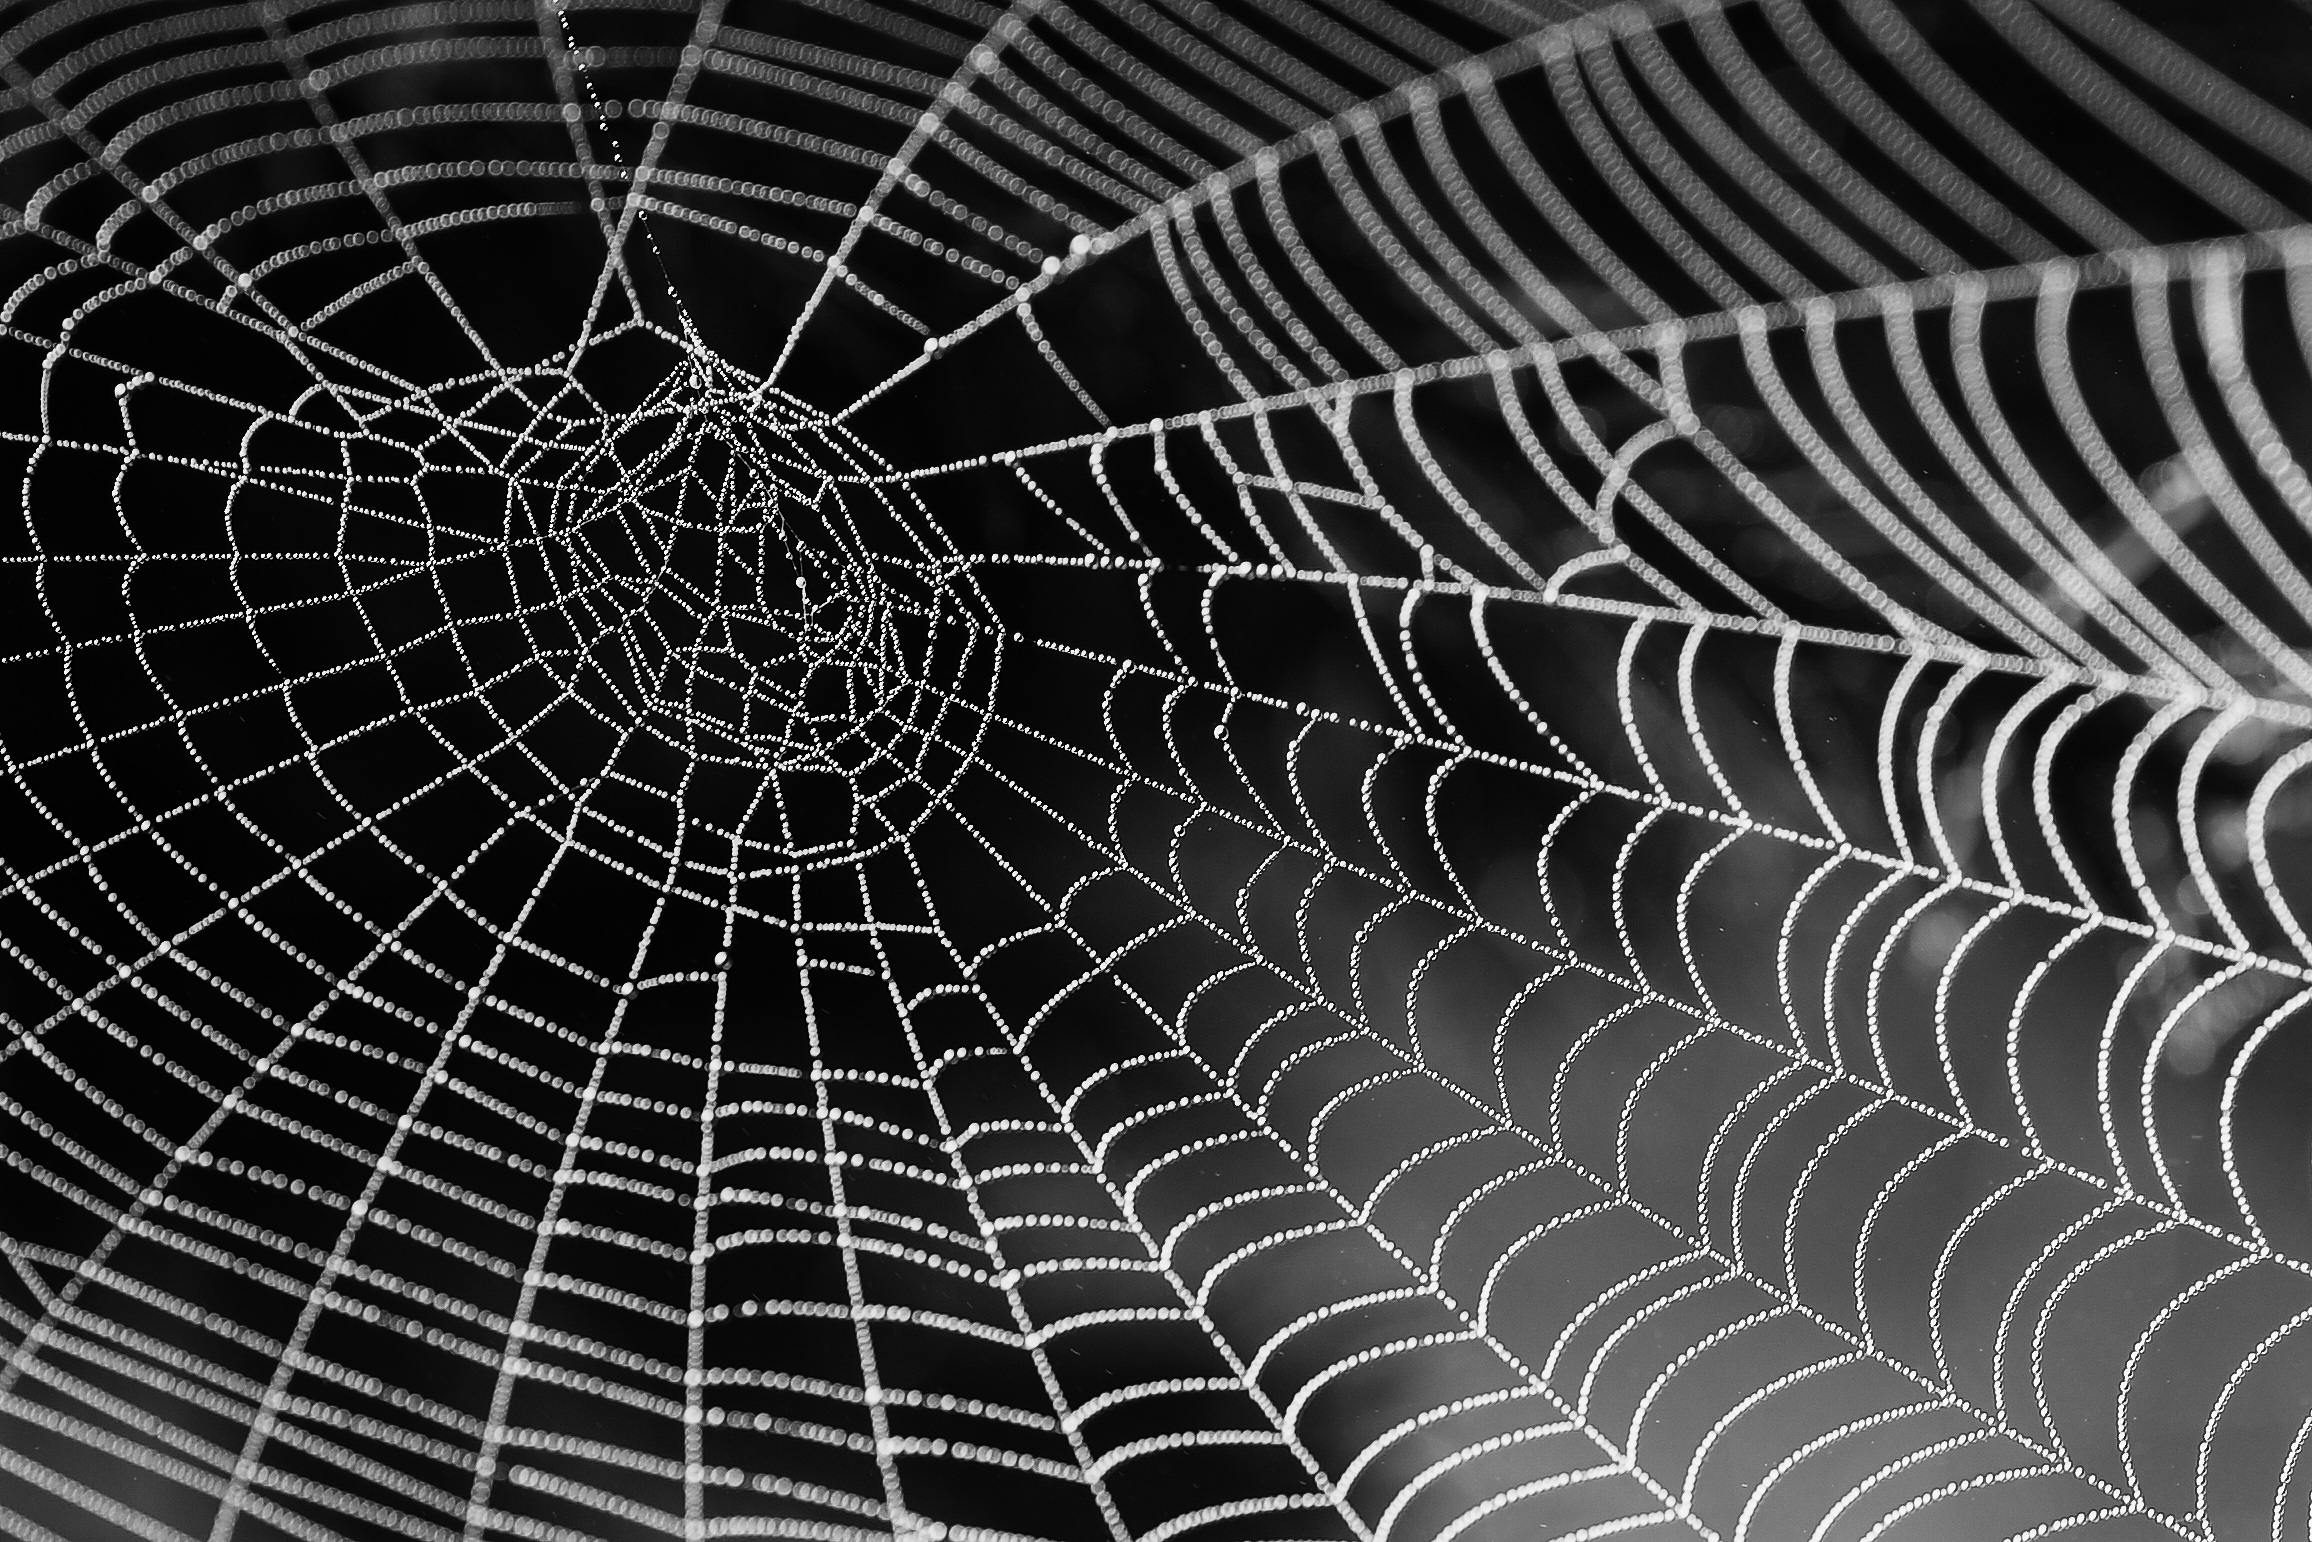 Spider+Reel Photos, Download The BEST Free Spider+Reel Stock